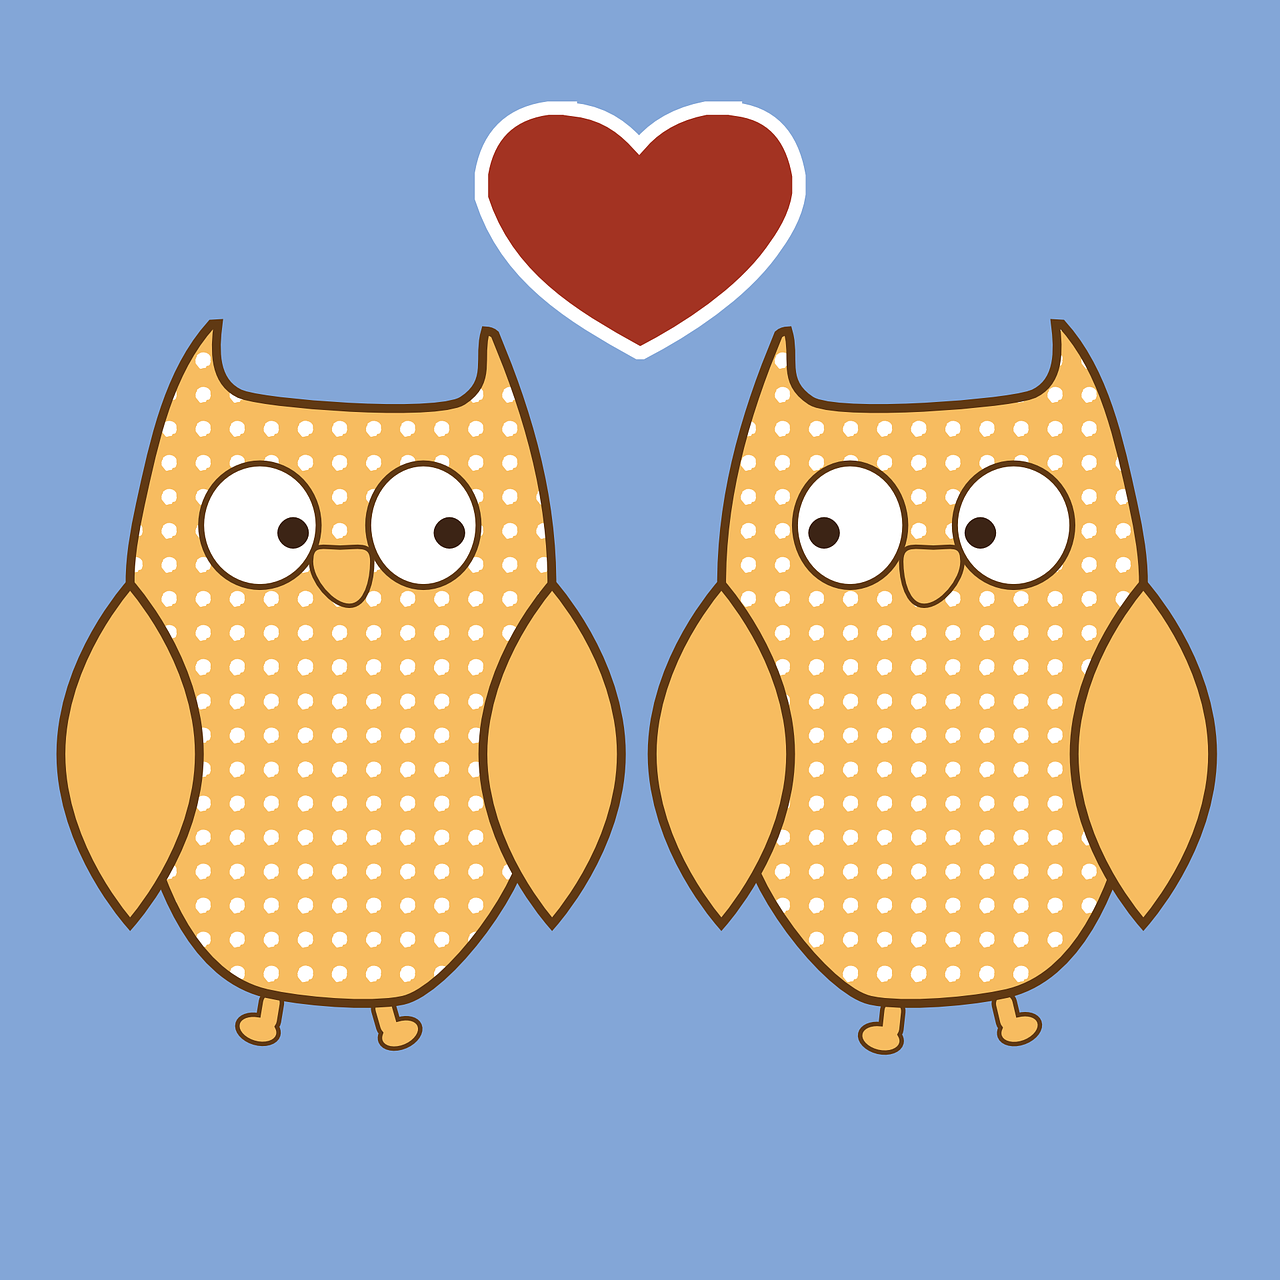 wedding,heart,love,birds,owls,marriage,free vector graphics,free pictures, free photos, free images, royalty free, free illustrations, public domain